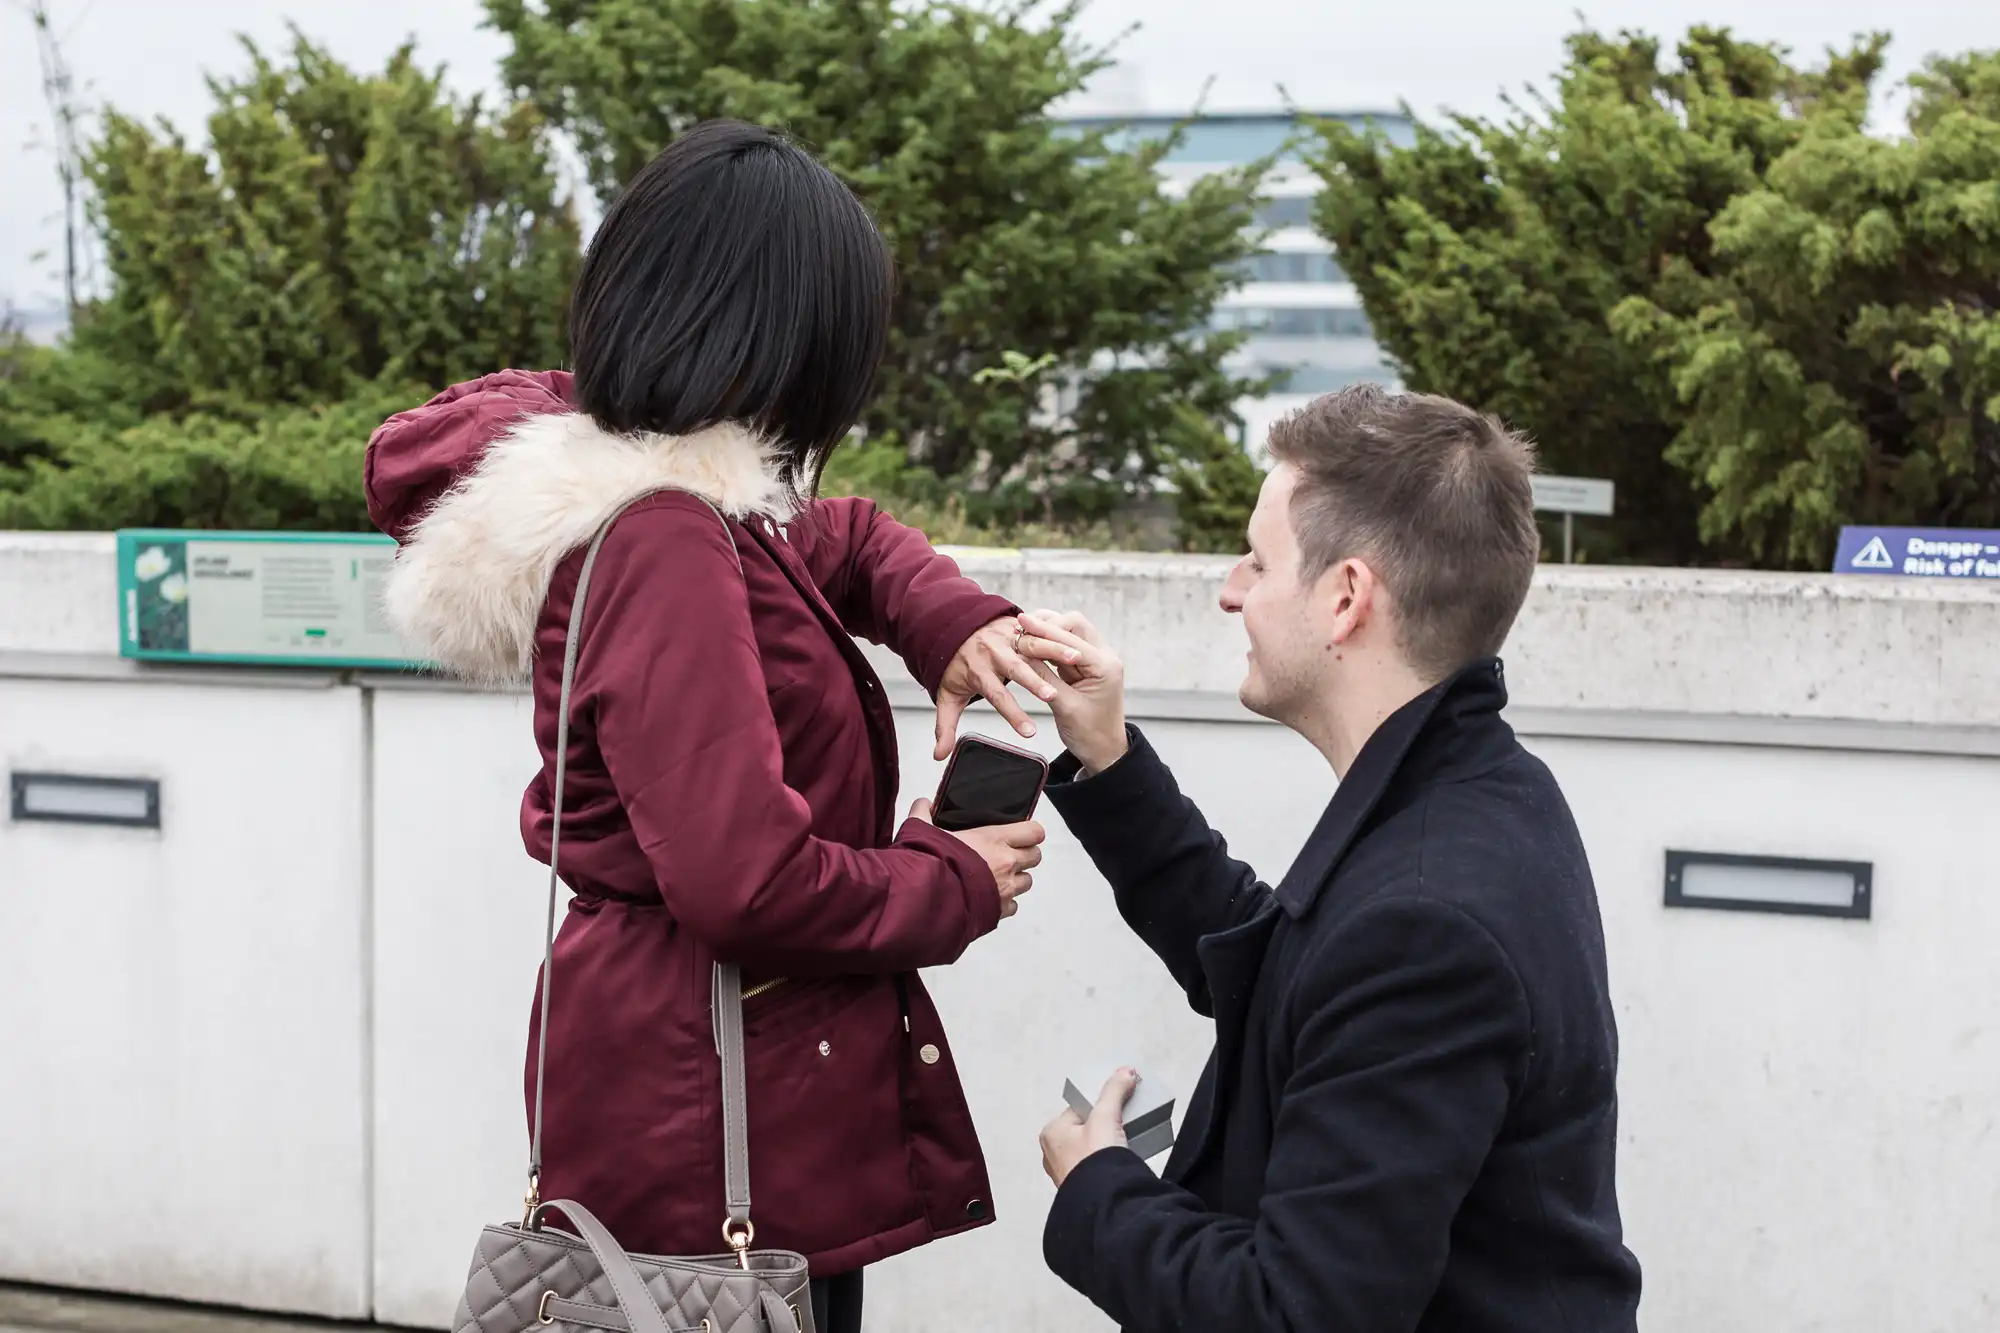 Man proposing to woman on one knee, holding her hand, outdoors with greenery and a building in the background.